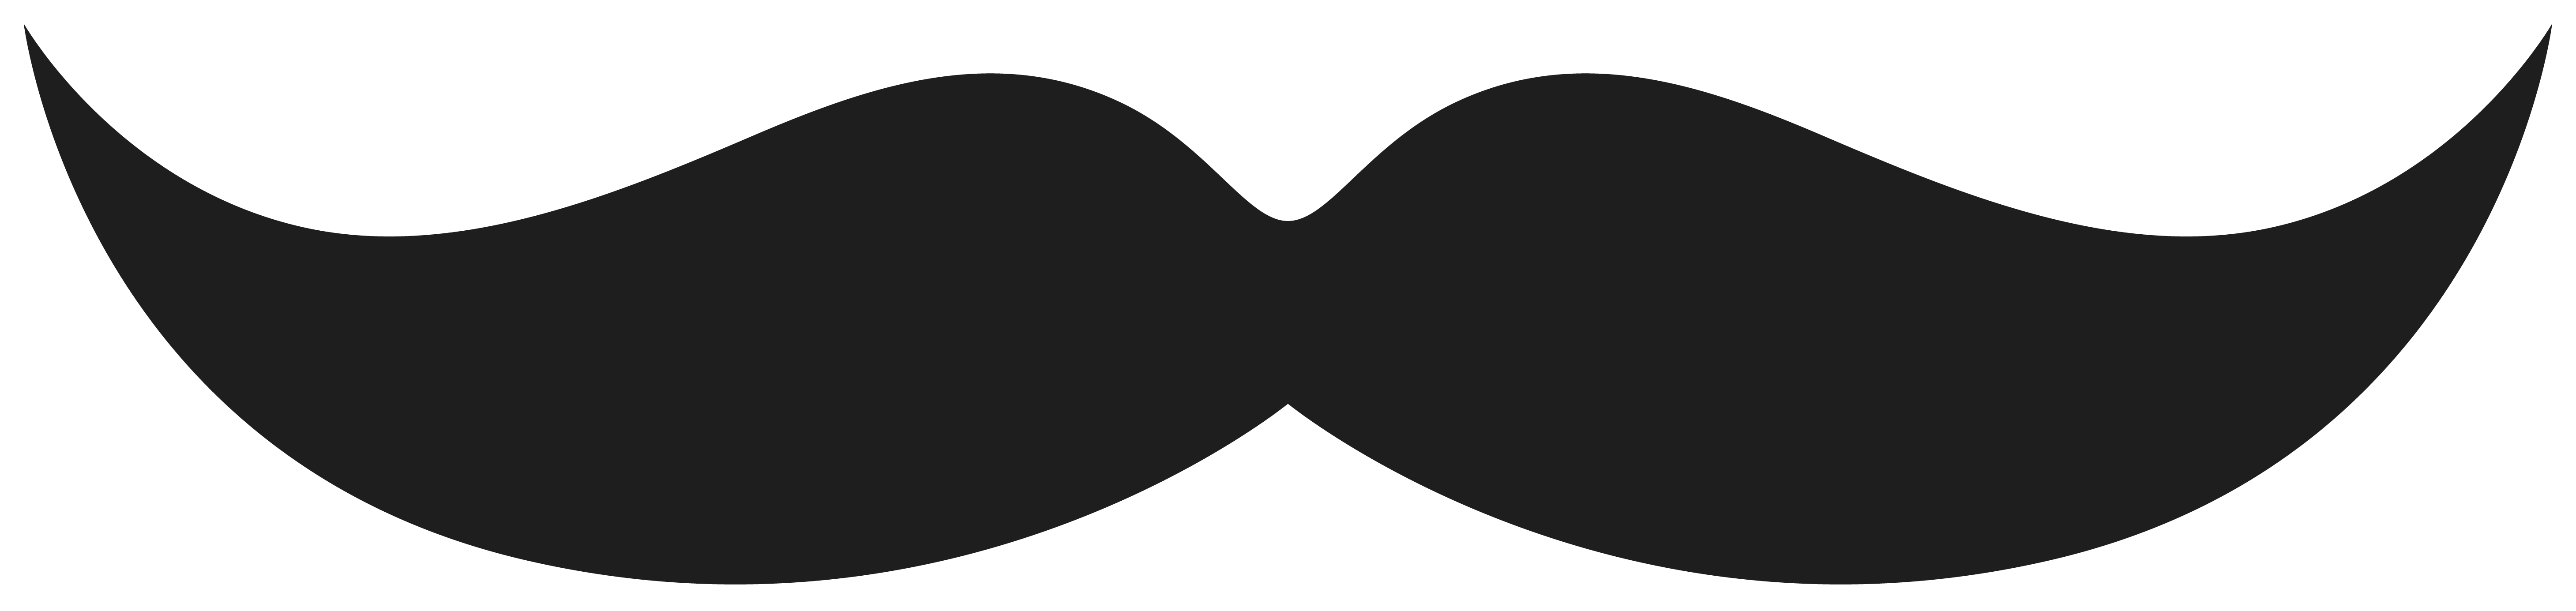 Bow Tie PNG HD - 149167